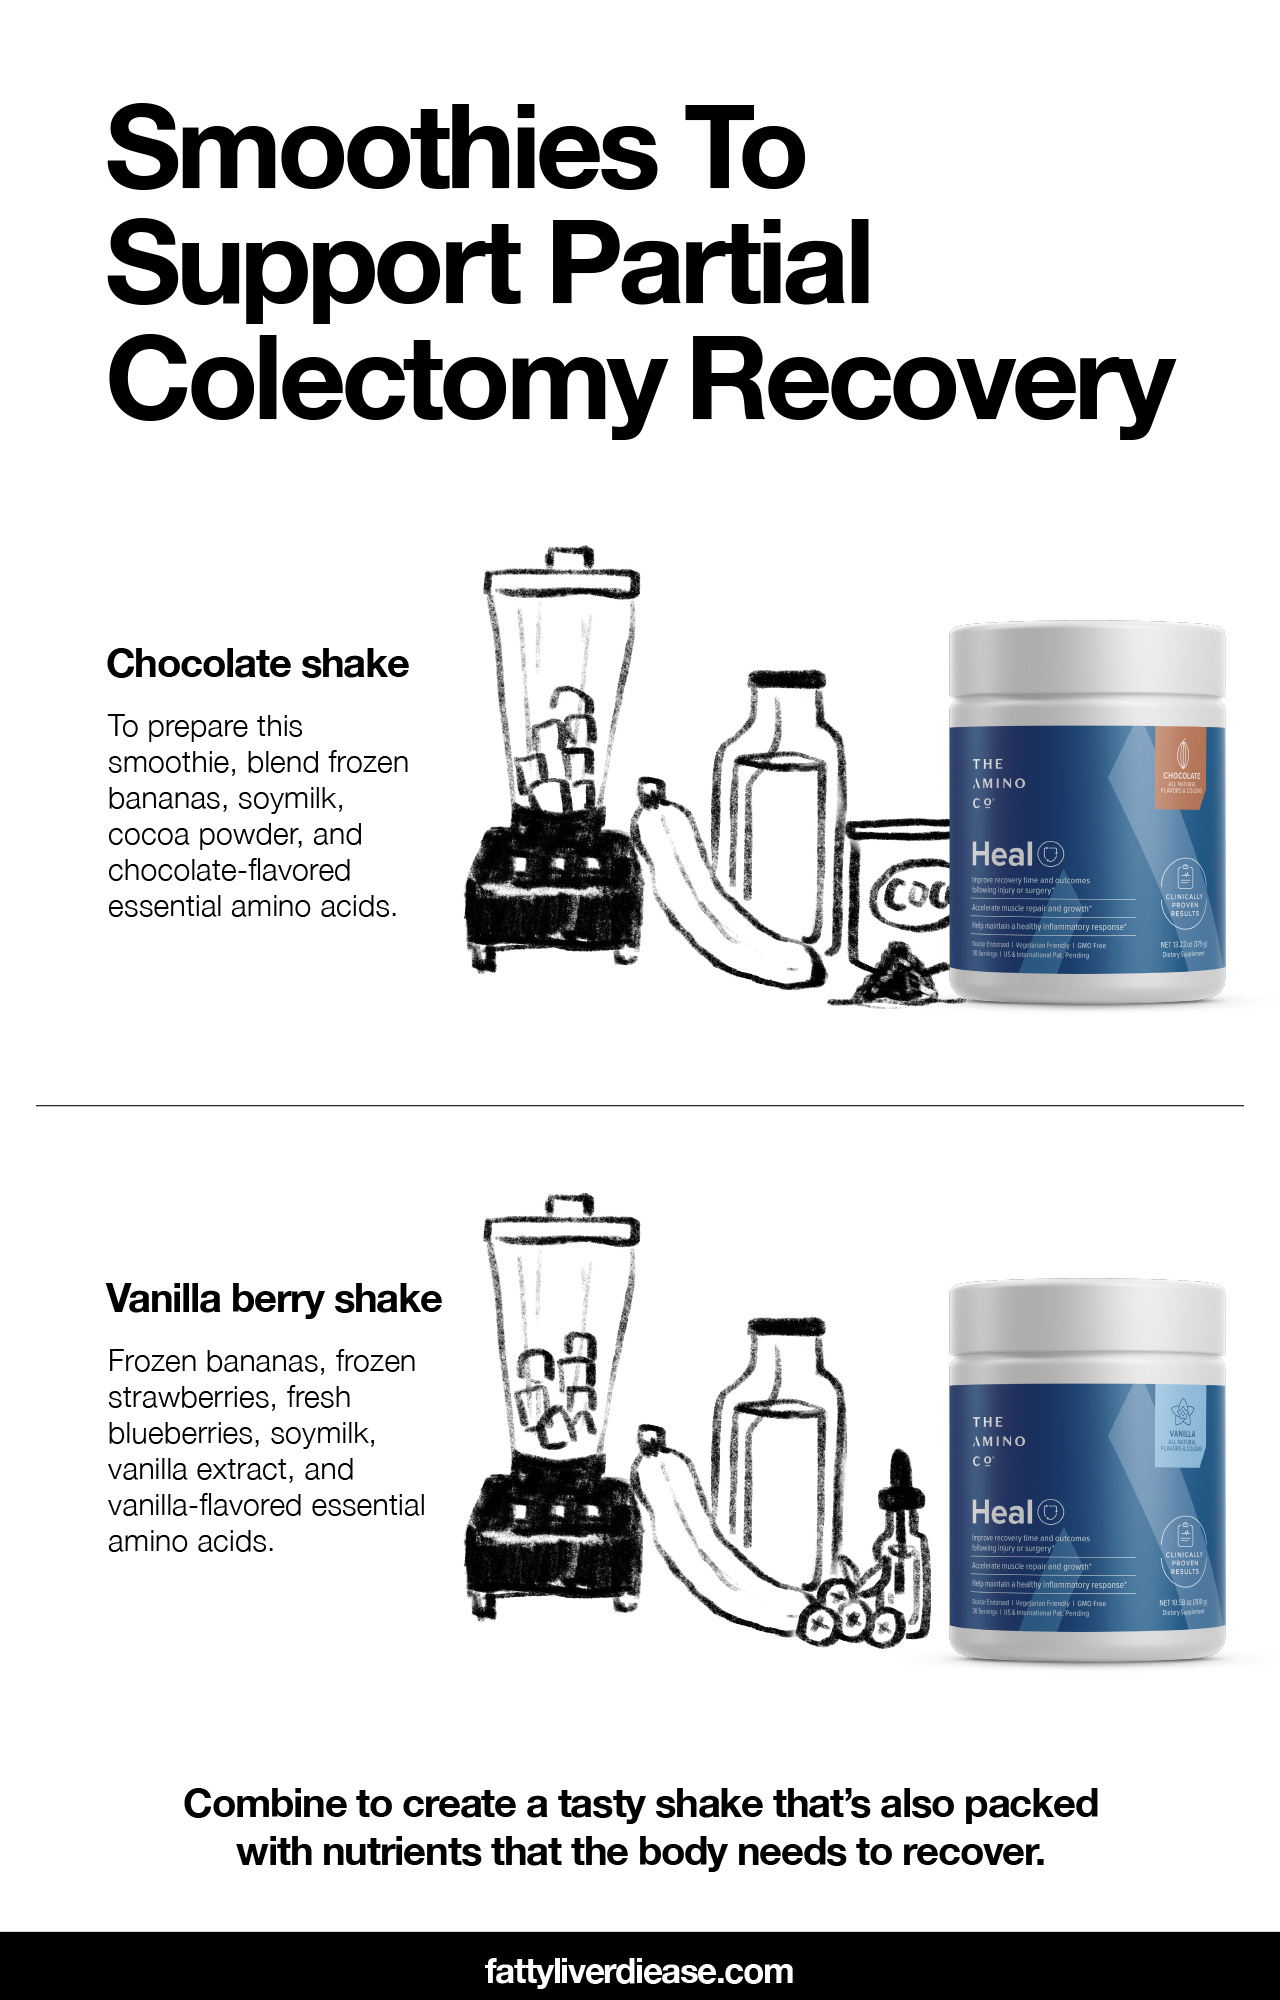 Smoothies To Support Partial Colectomy Recovery